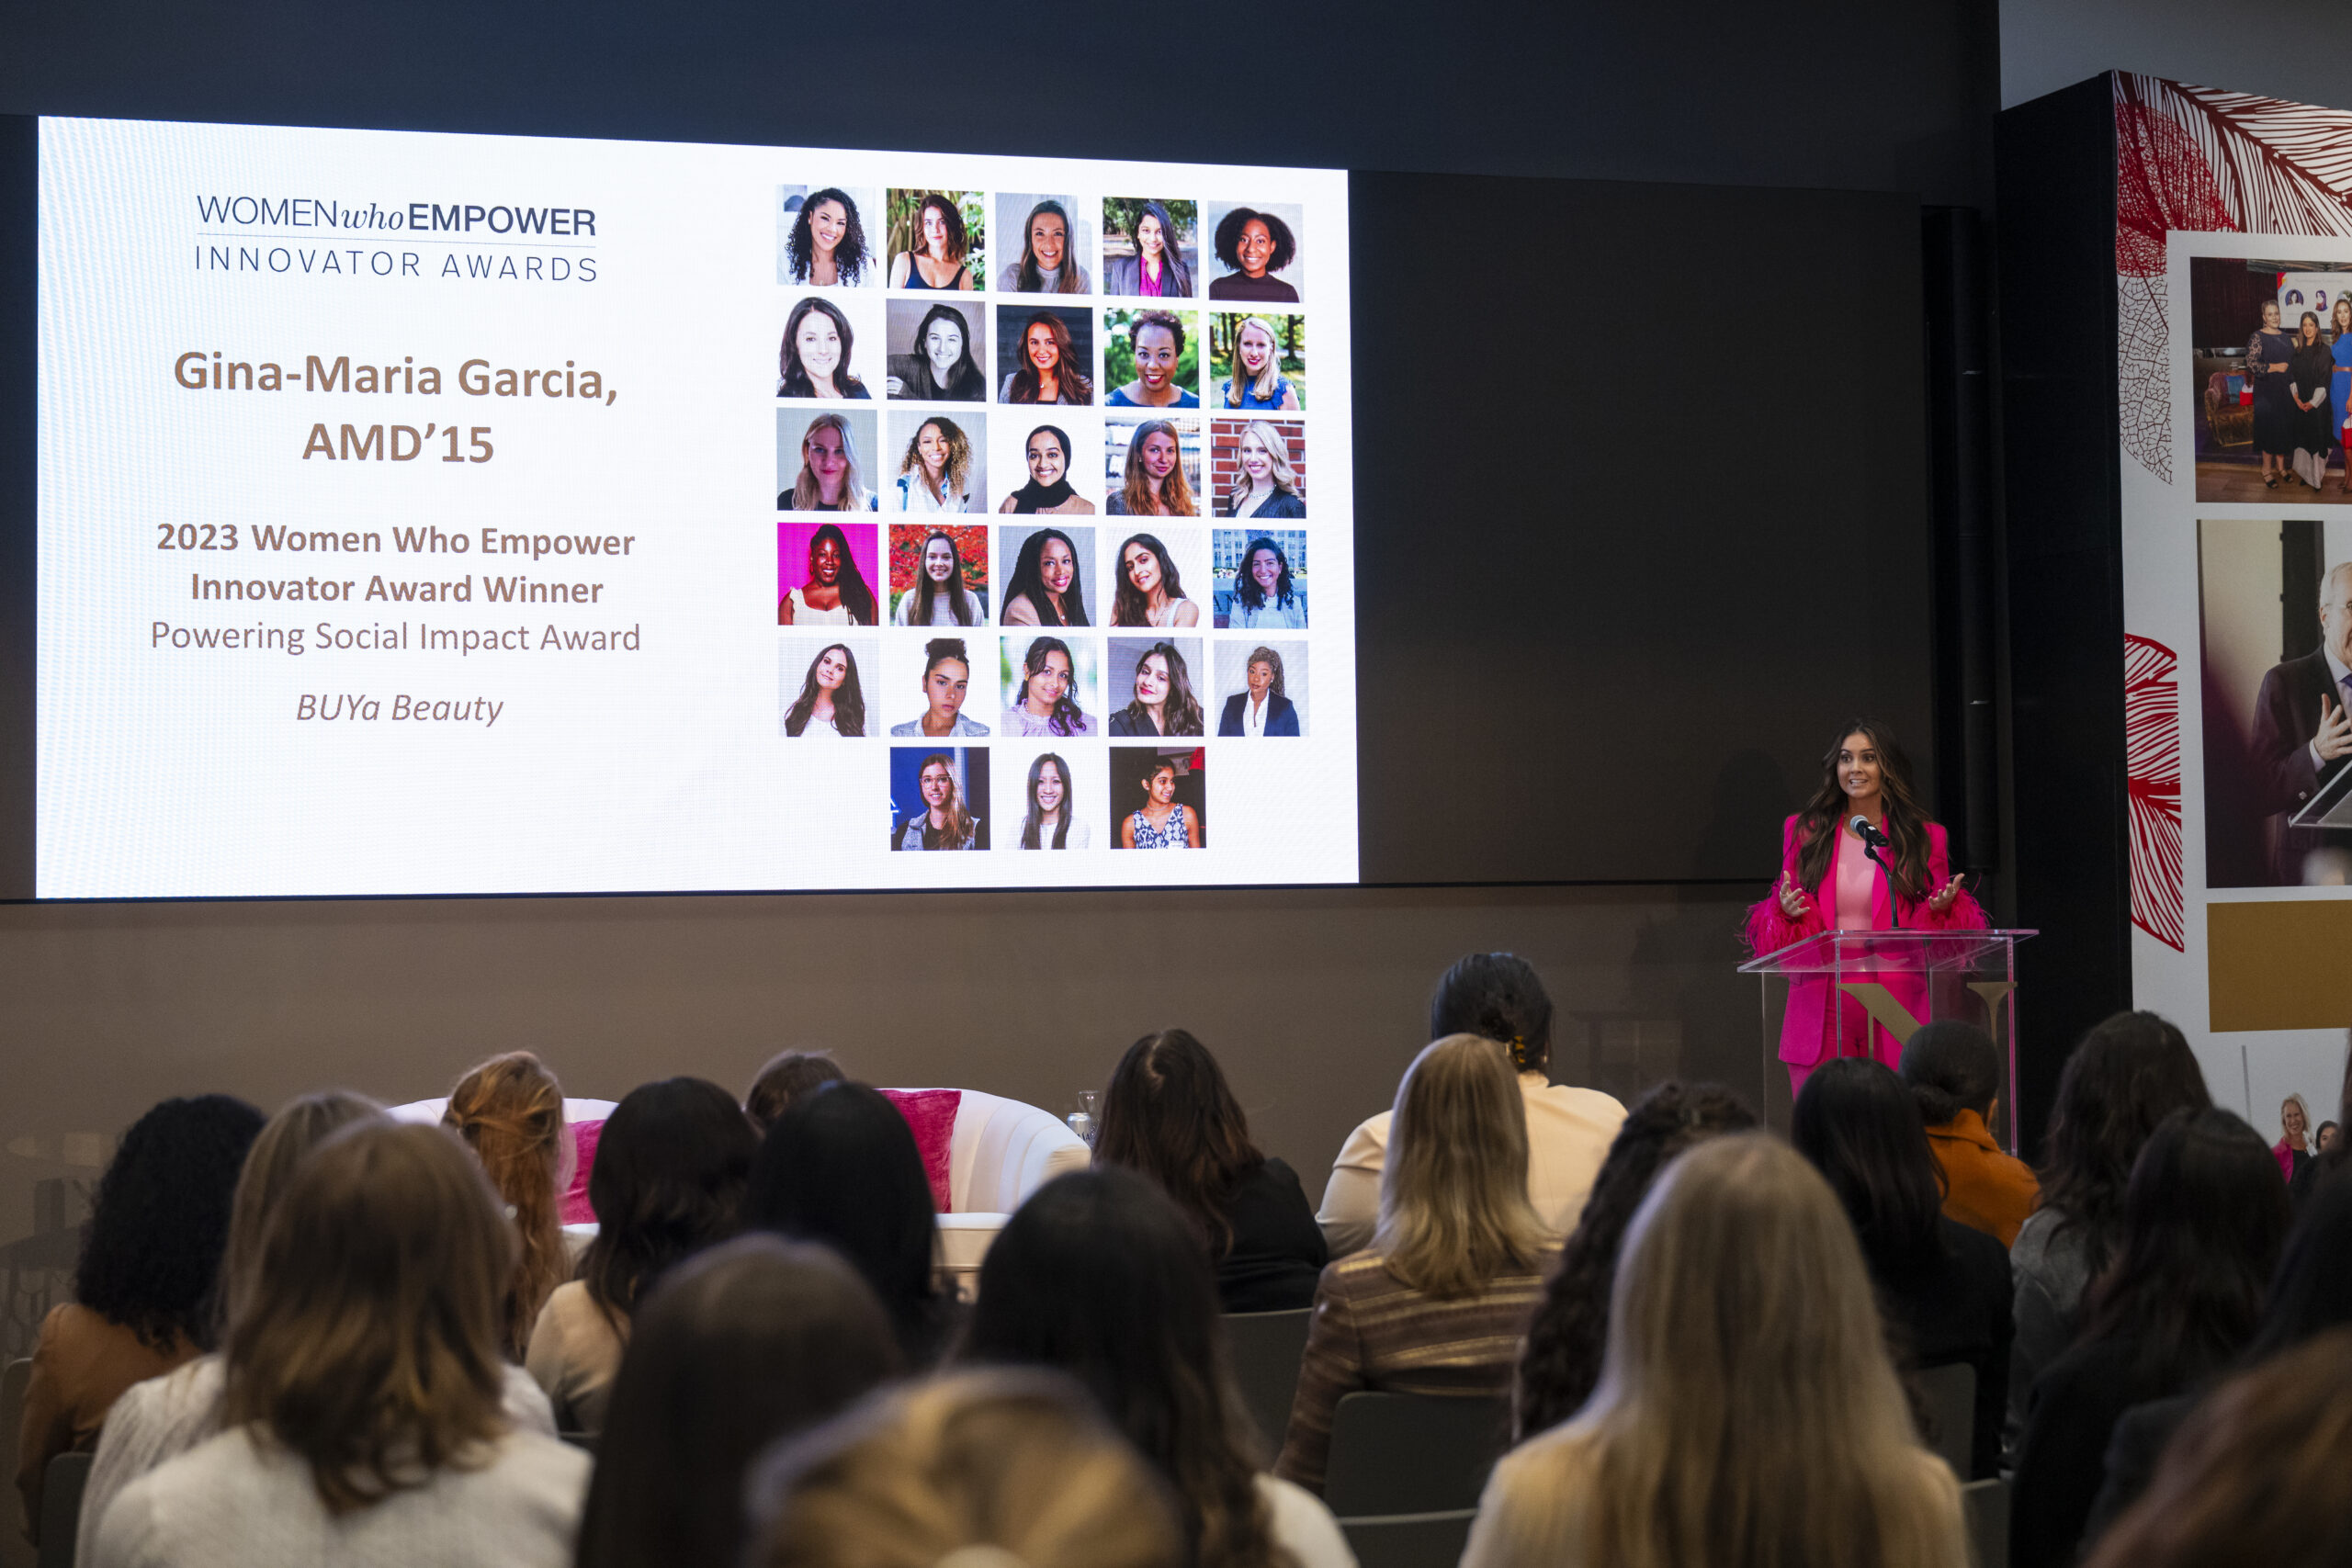 Gina-Maria Garcia speaking at a Women Who Empower summit in front of a screen displaying her name and information. 